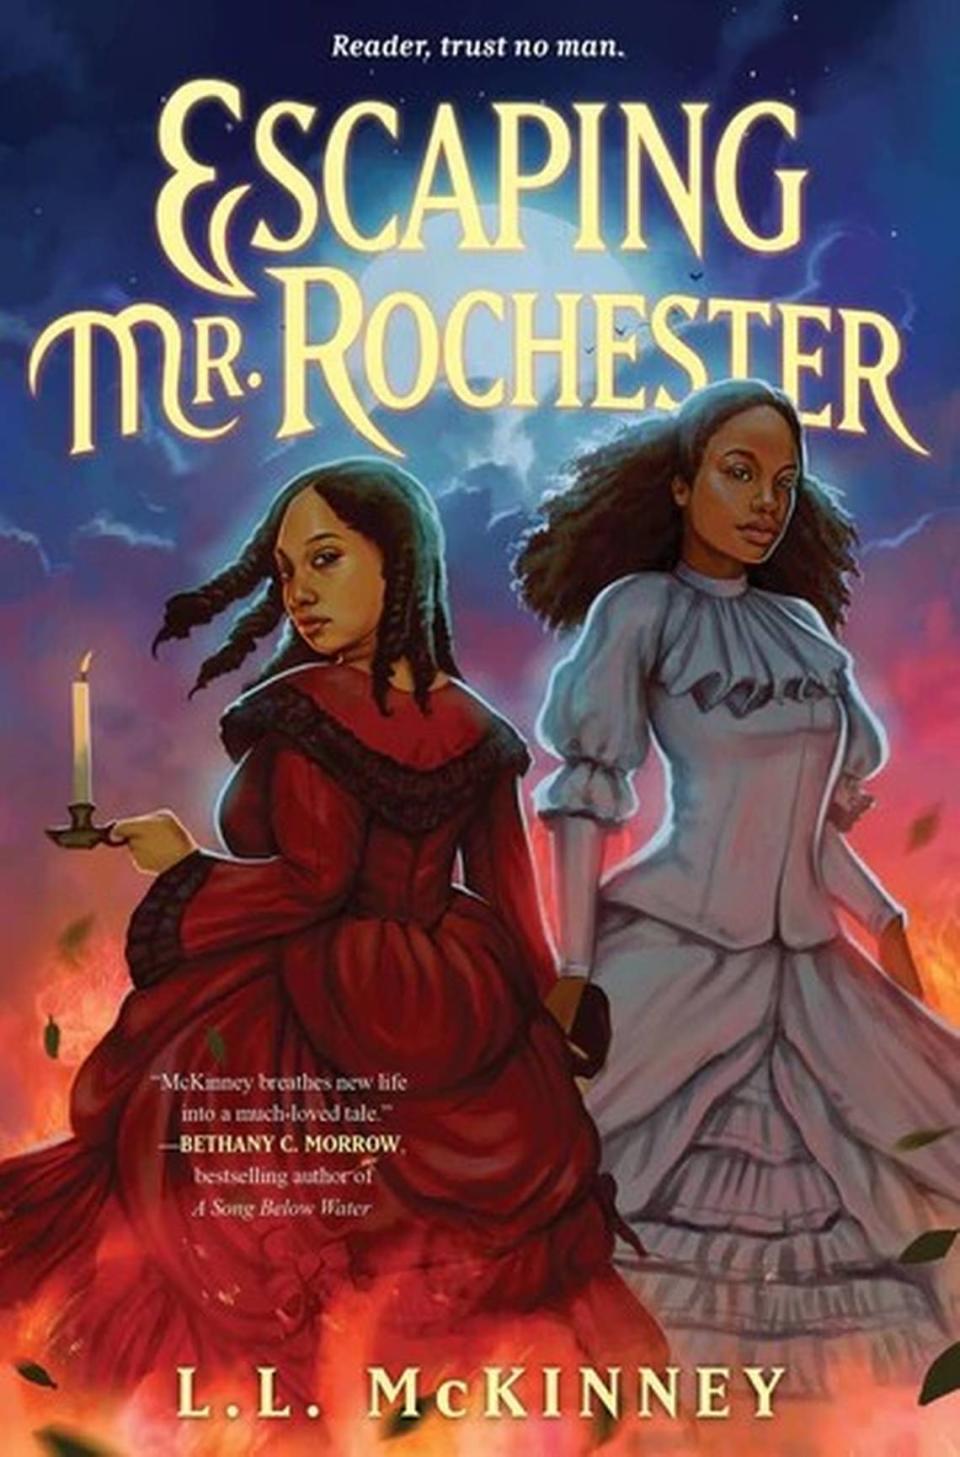 “Escaping Mr. Rochester” by L.L. McKinney